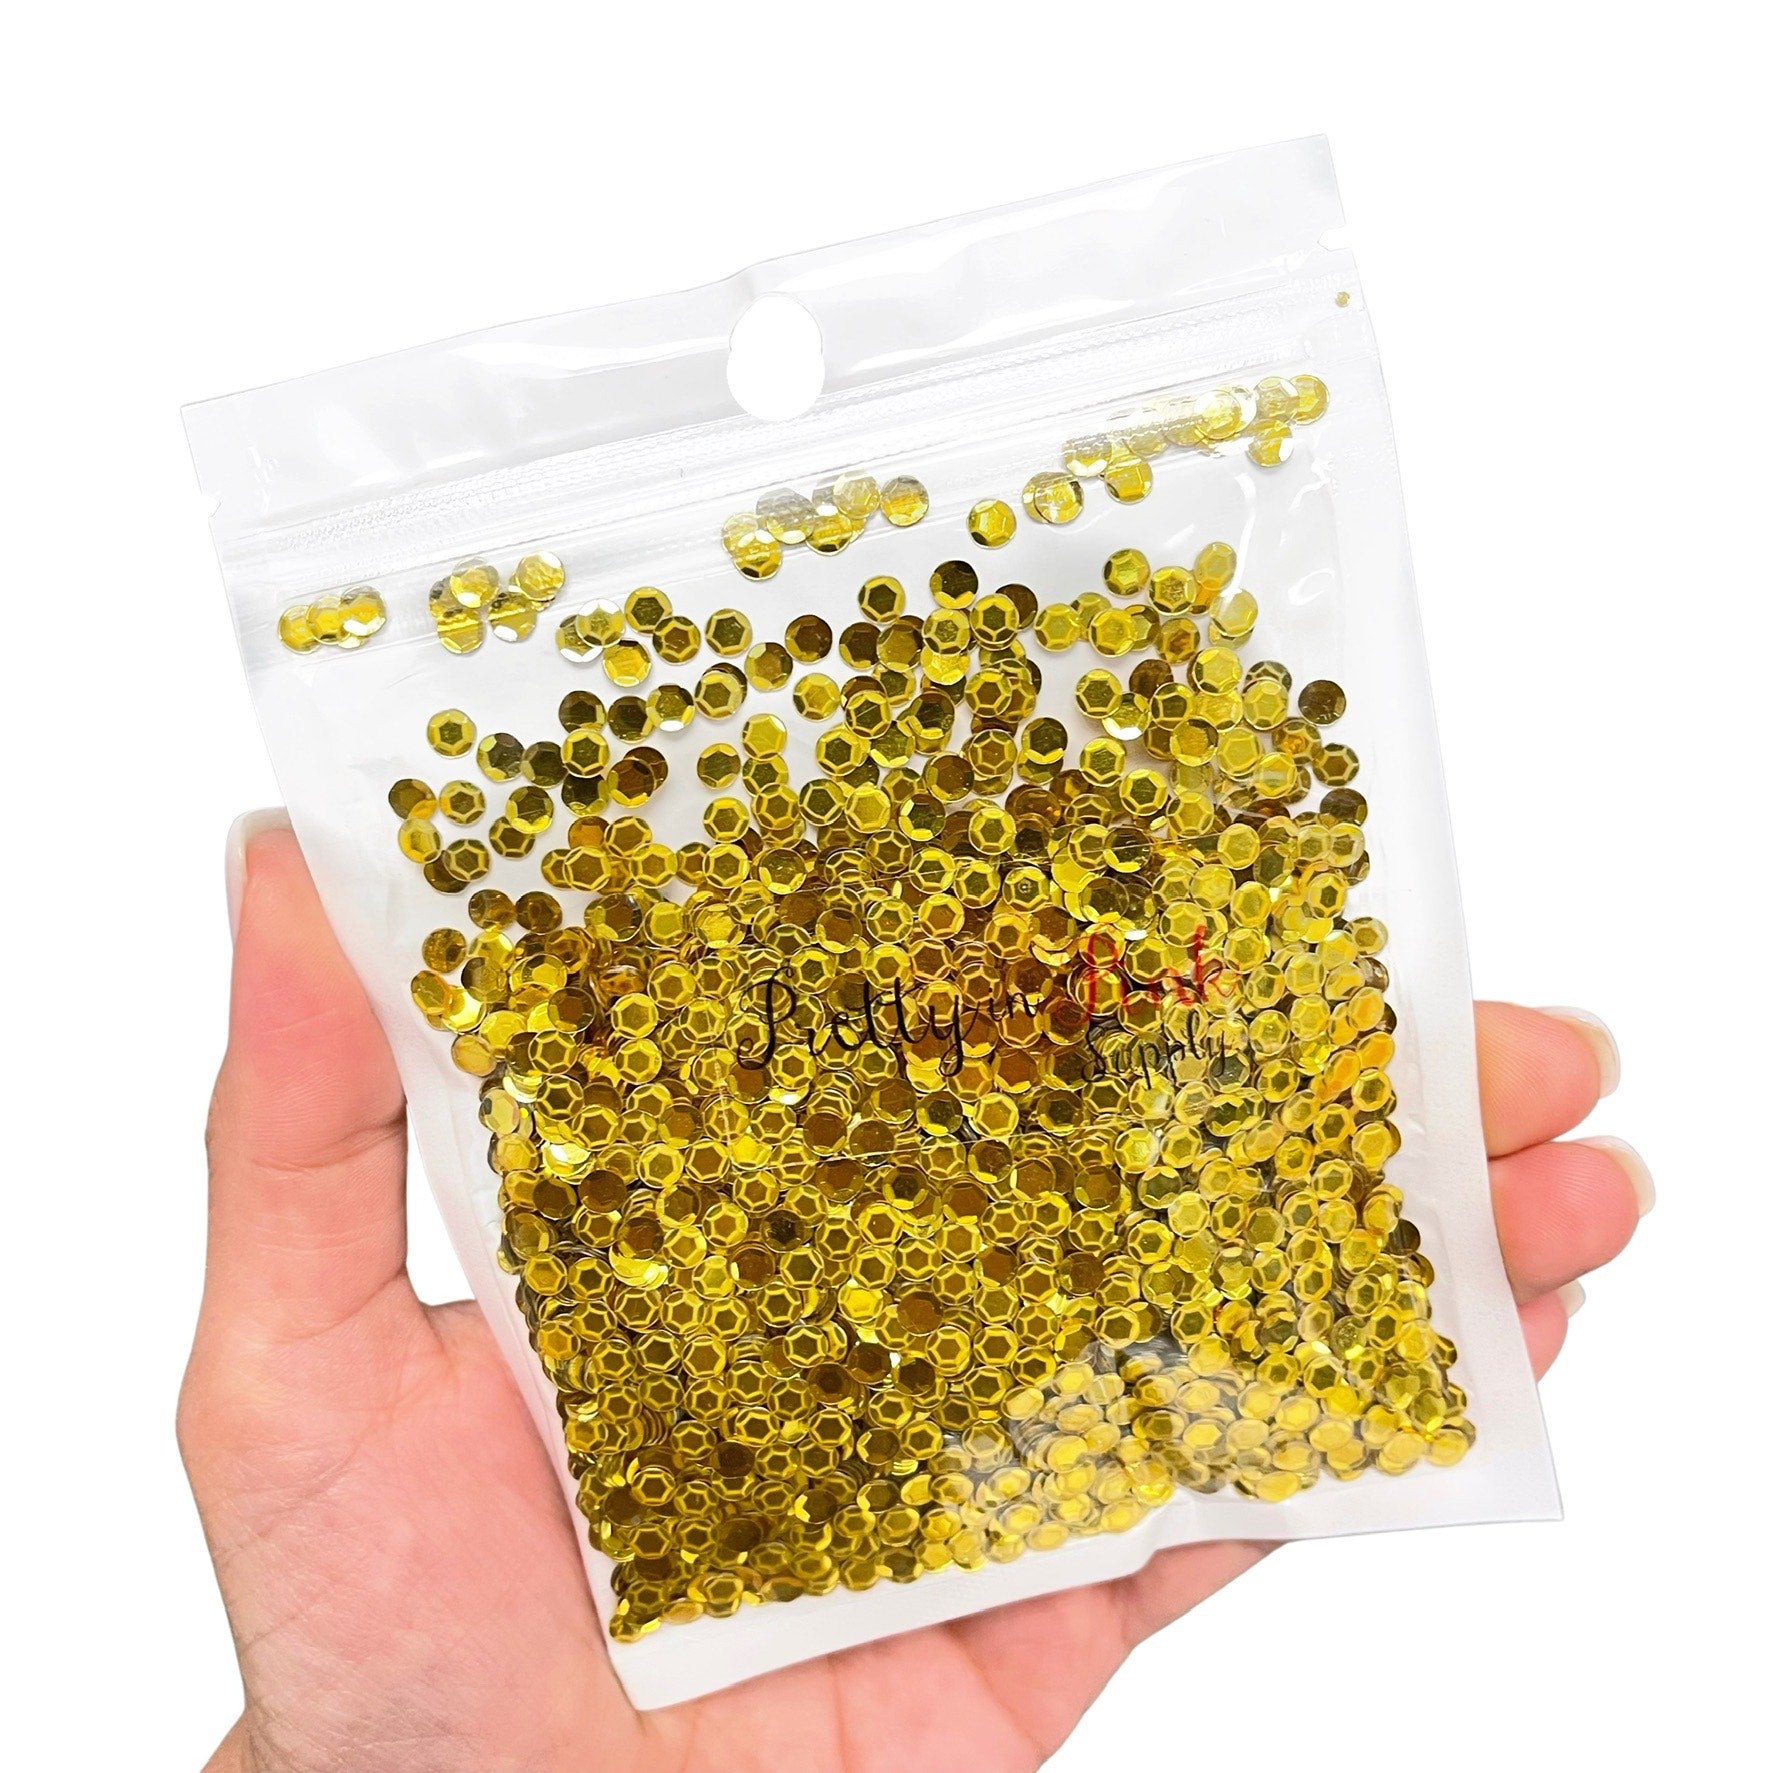 Resealable bag of St. Patrick's Day gold coin metallic sequin glitter.